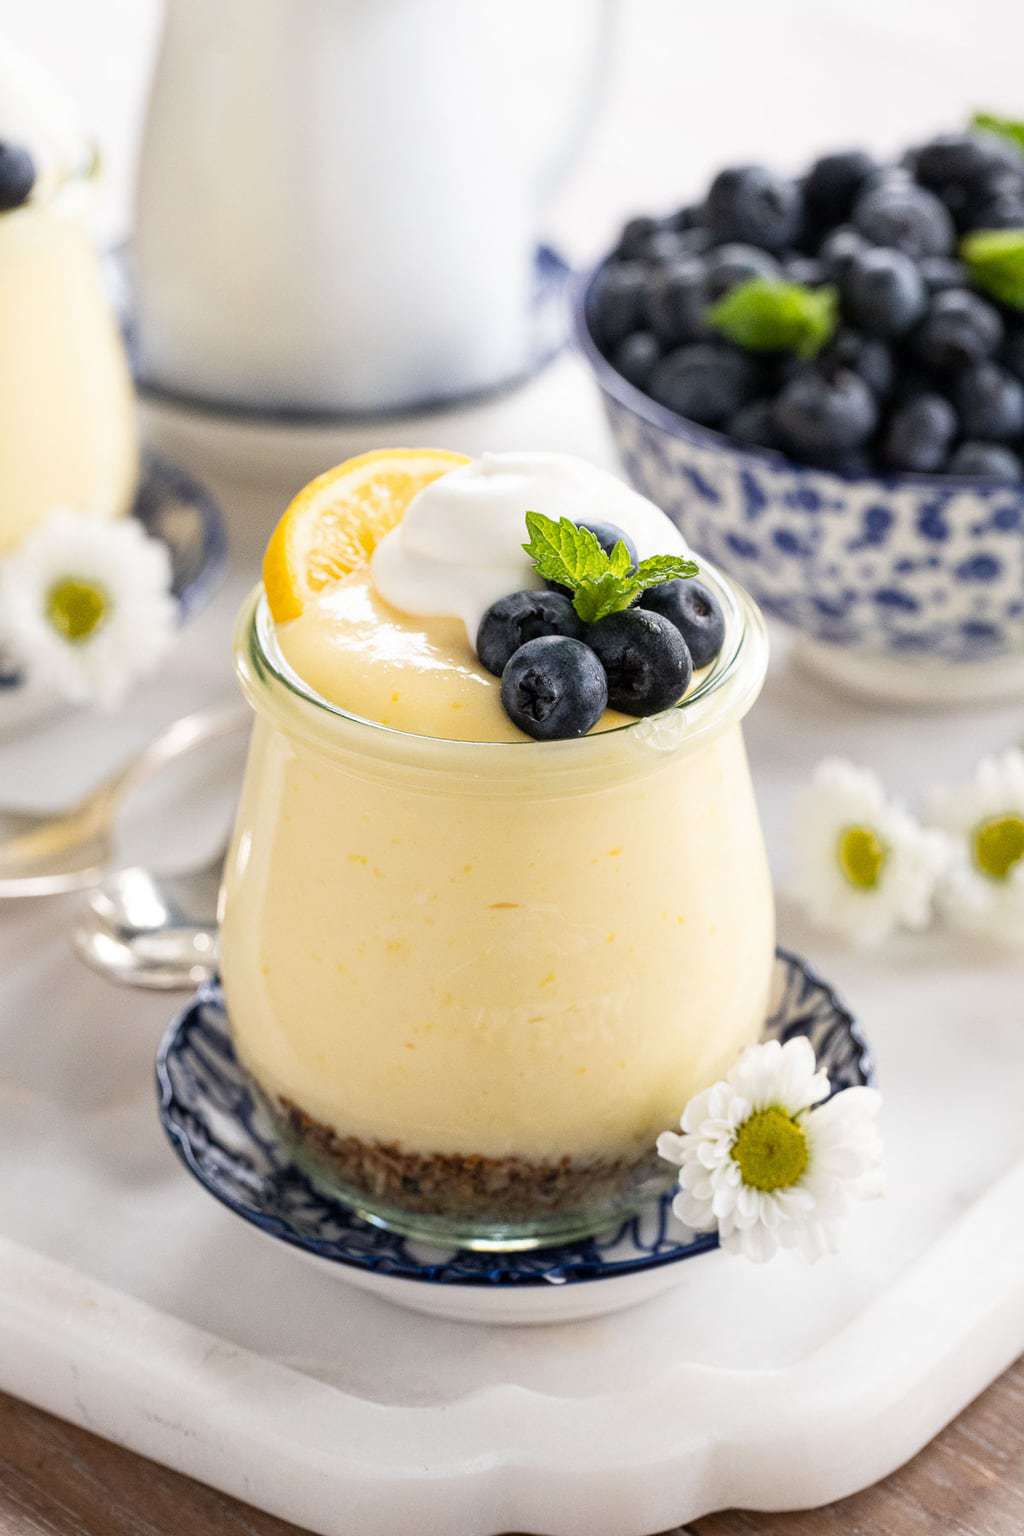 Closeup photo of a glass Week jar filled with Easy Lemon Curd Mousse garnished with whipped cream, blueberries, lemon slices and mint leaves.